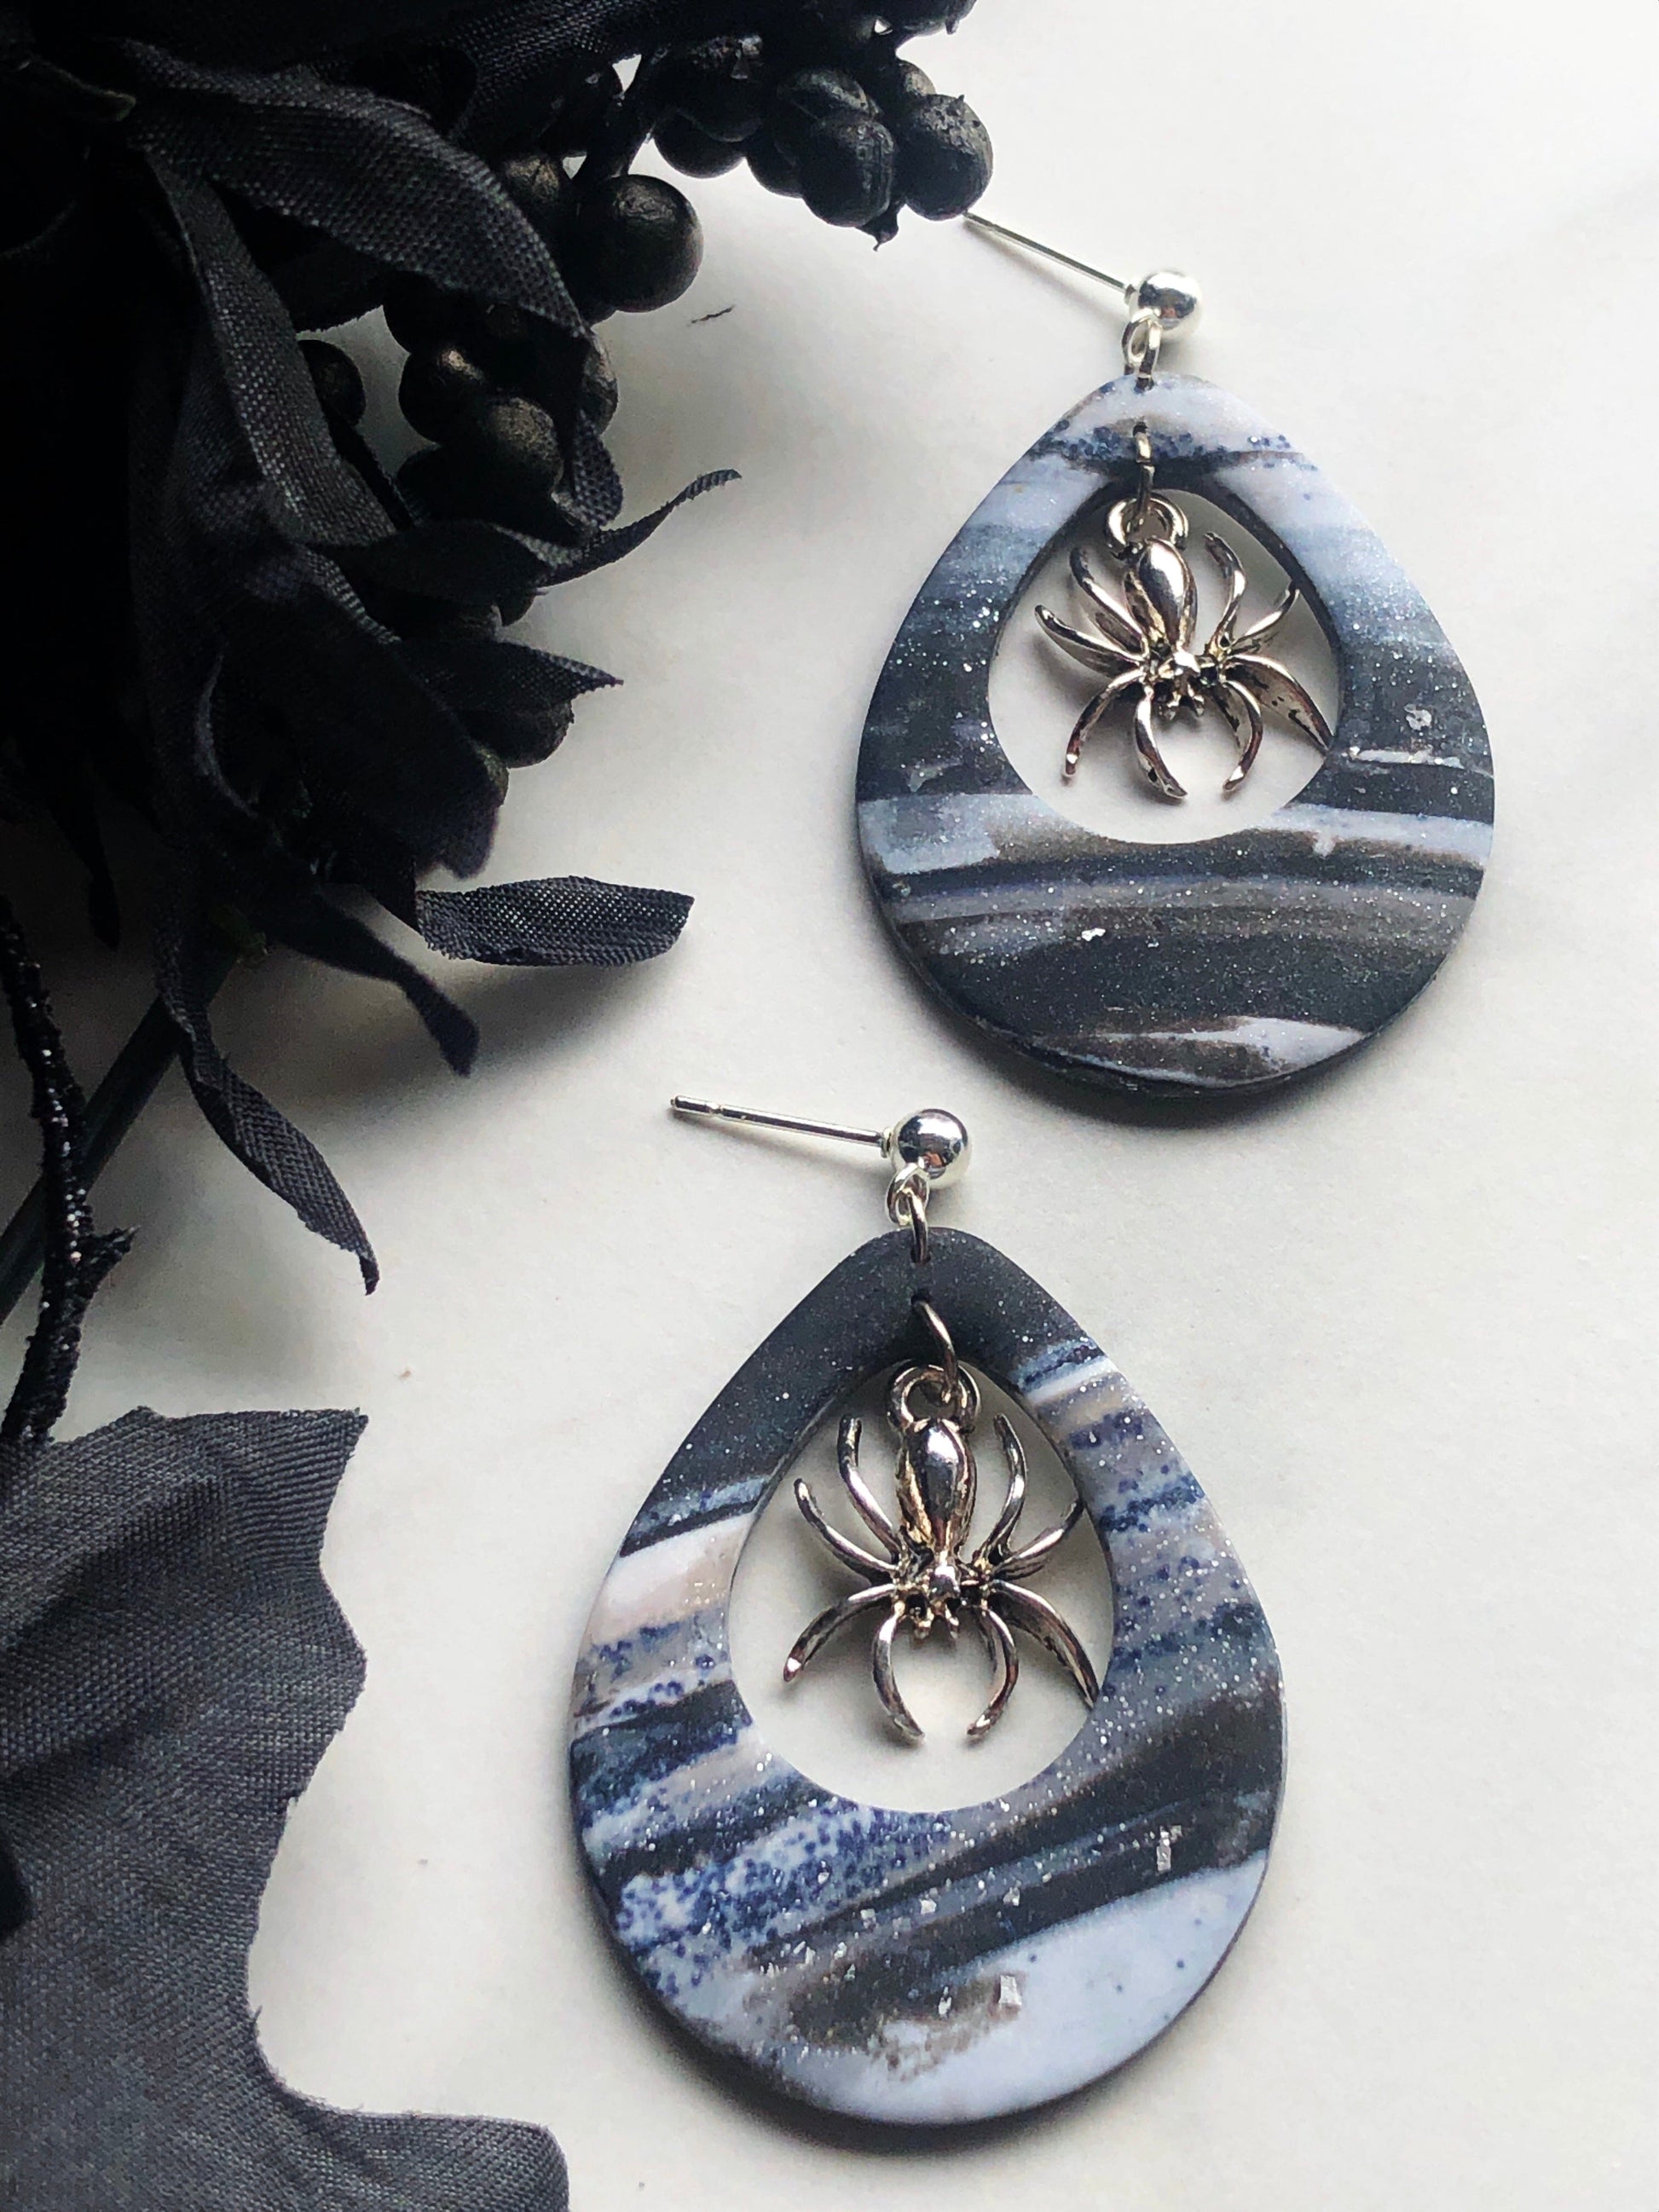 Earrings Arana Marbled Silver Polymer Clay Earrings and Silver Spider Charm